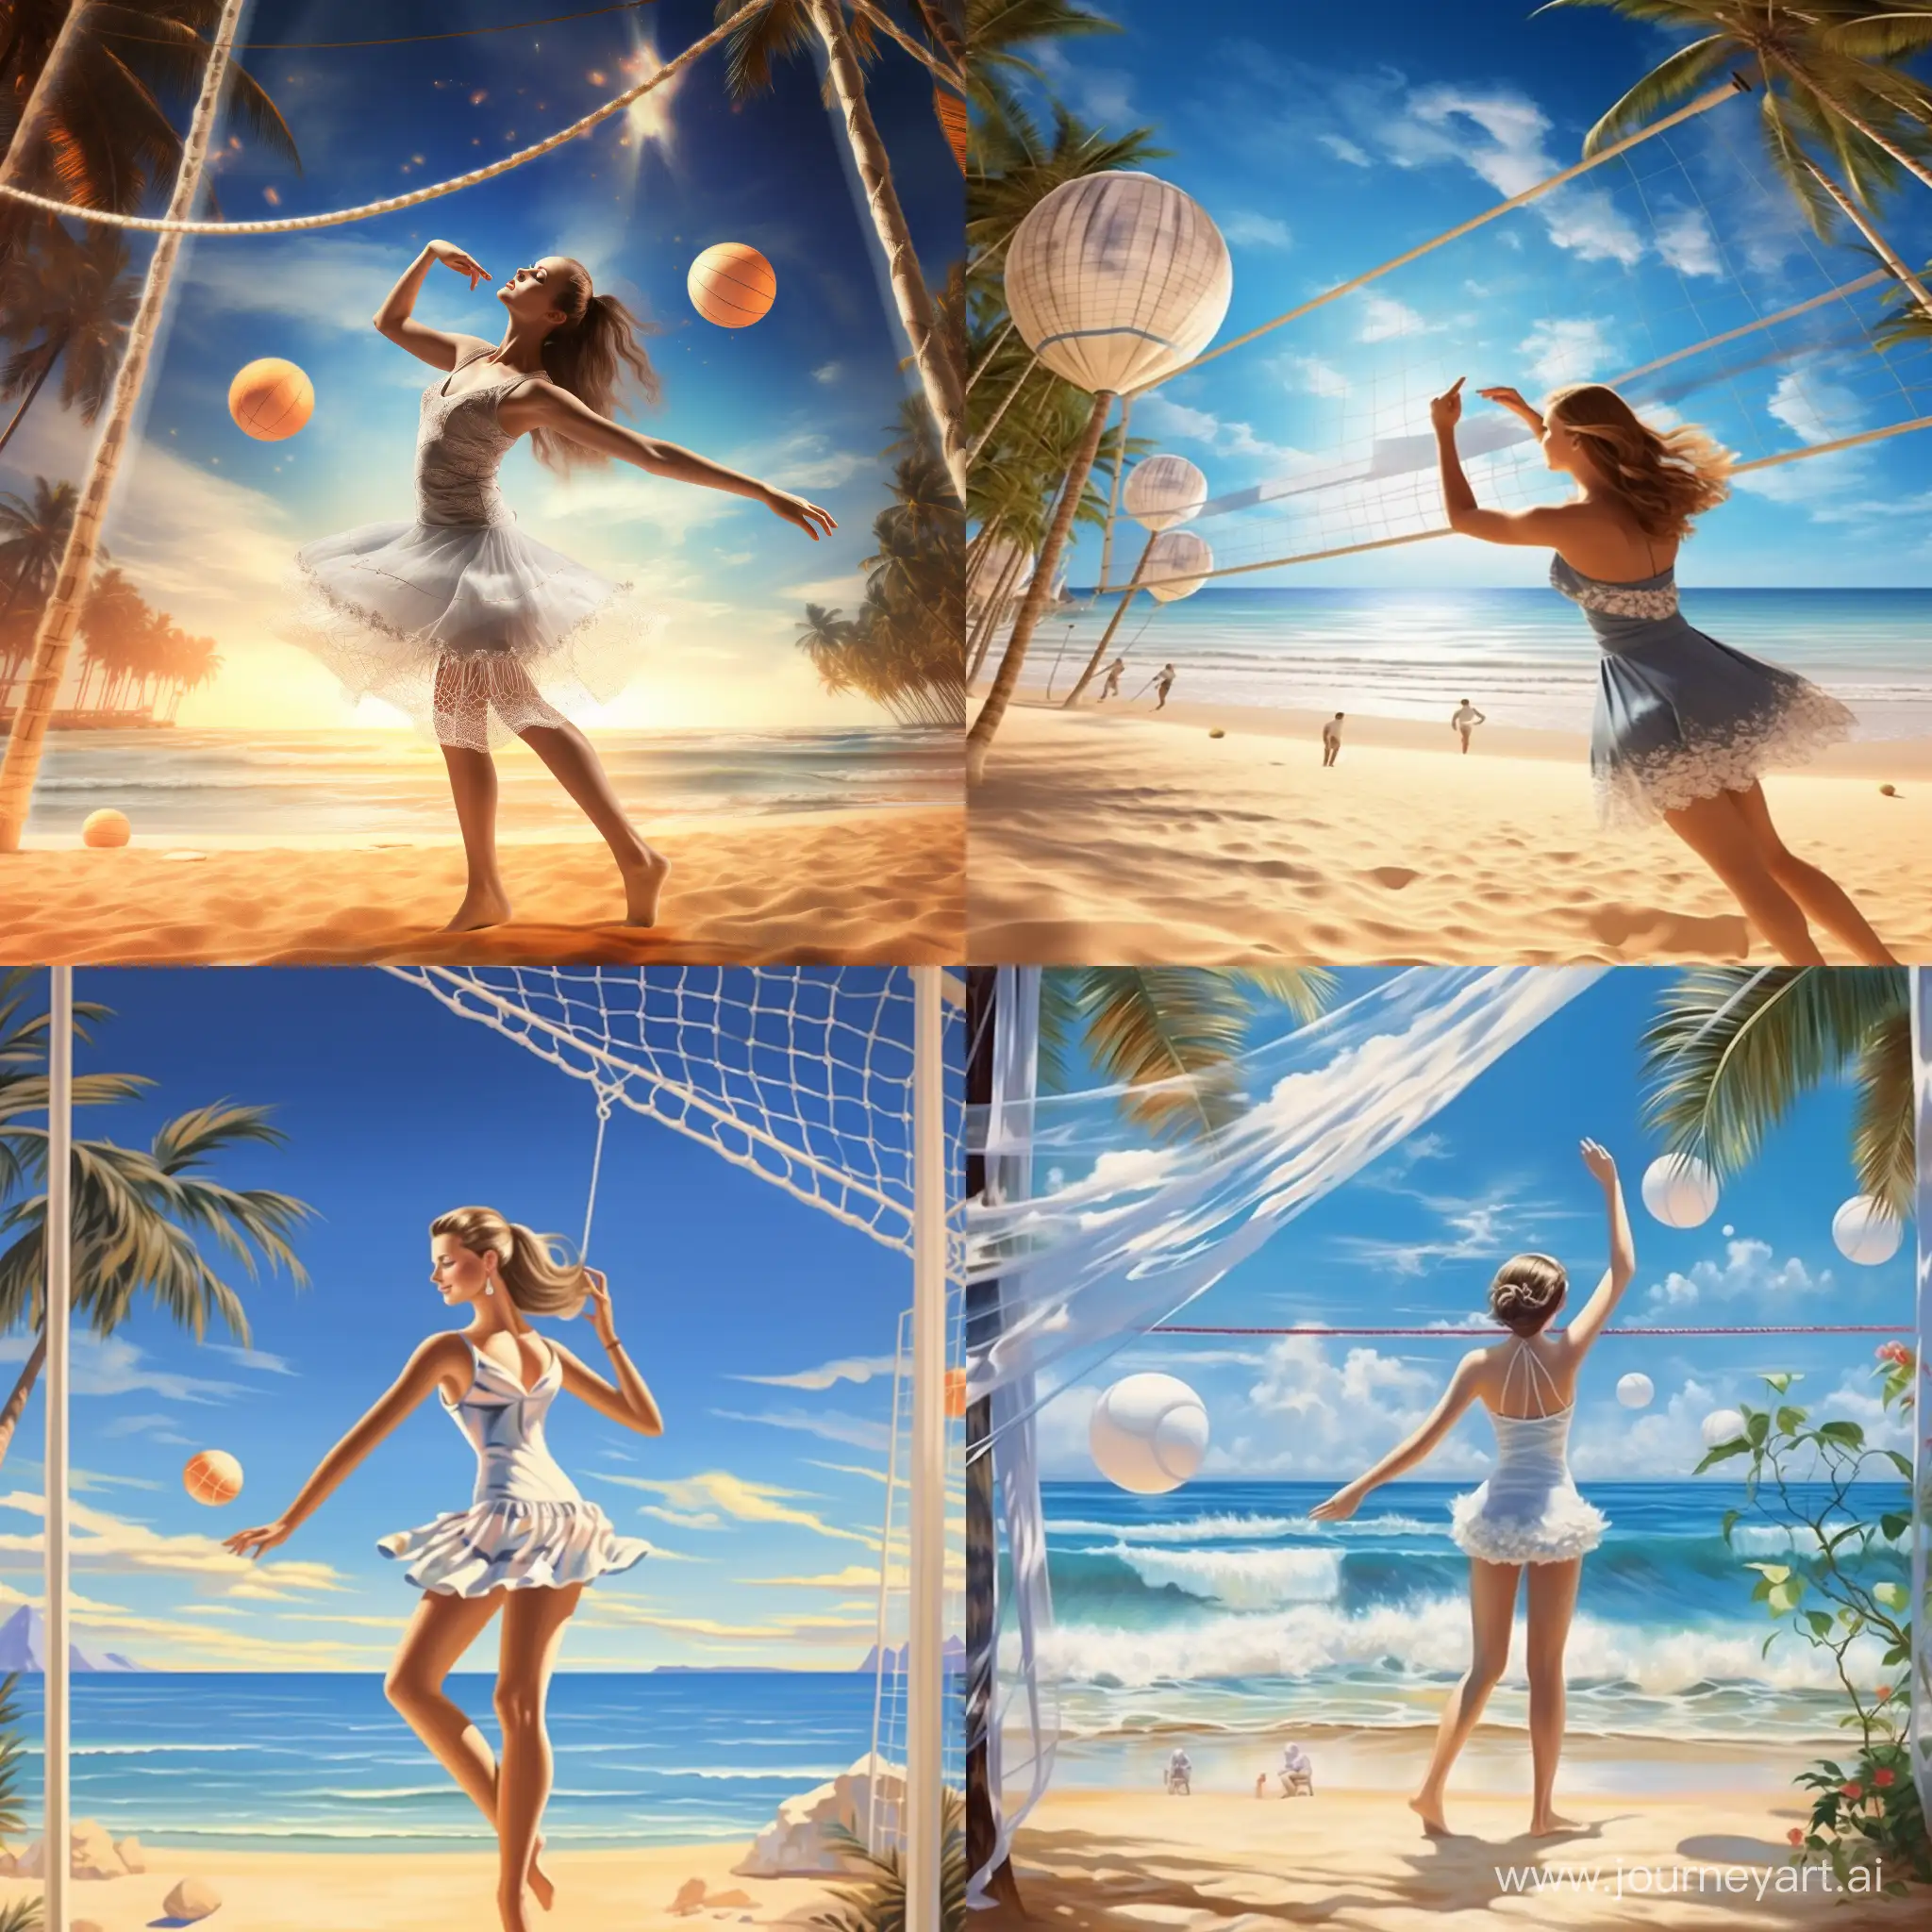 Beach-Ballerina-Strikes-a-Volleyball-Pose-by-the-Sea